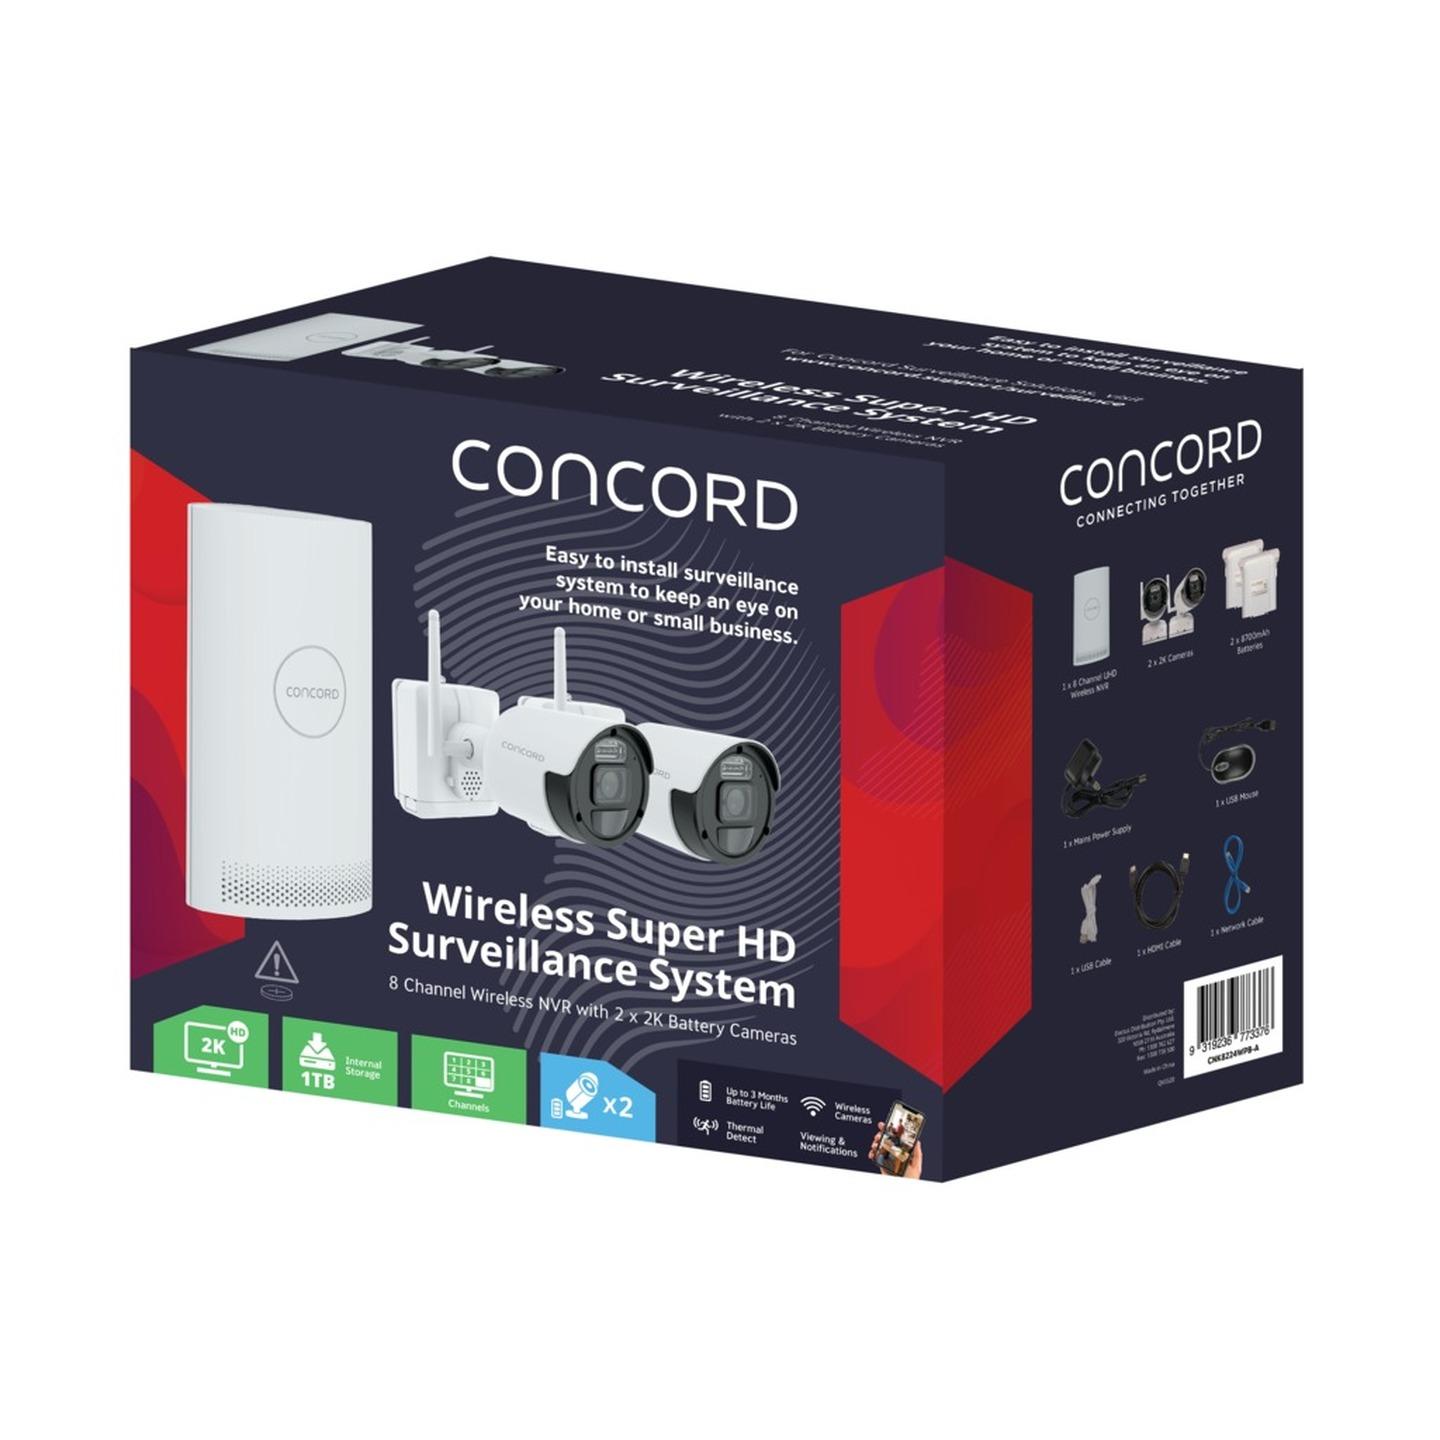 Concord 8 Channel Wireless NVR Kit with 2x 2K Battery Cameras